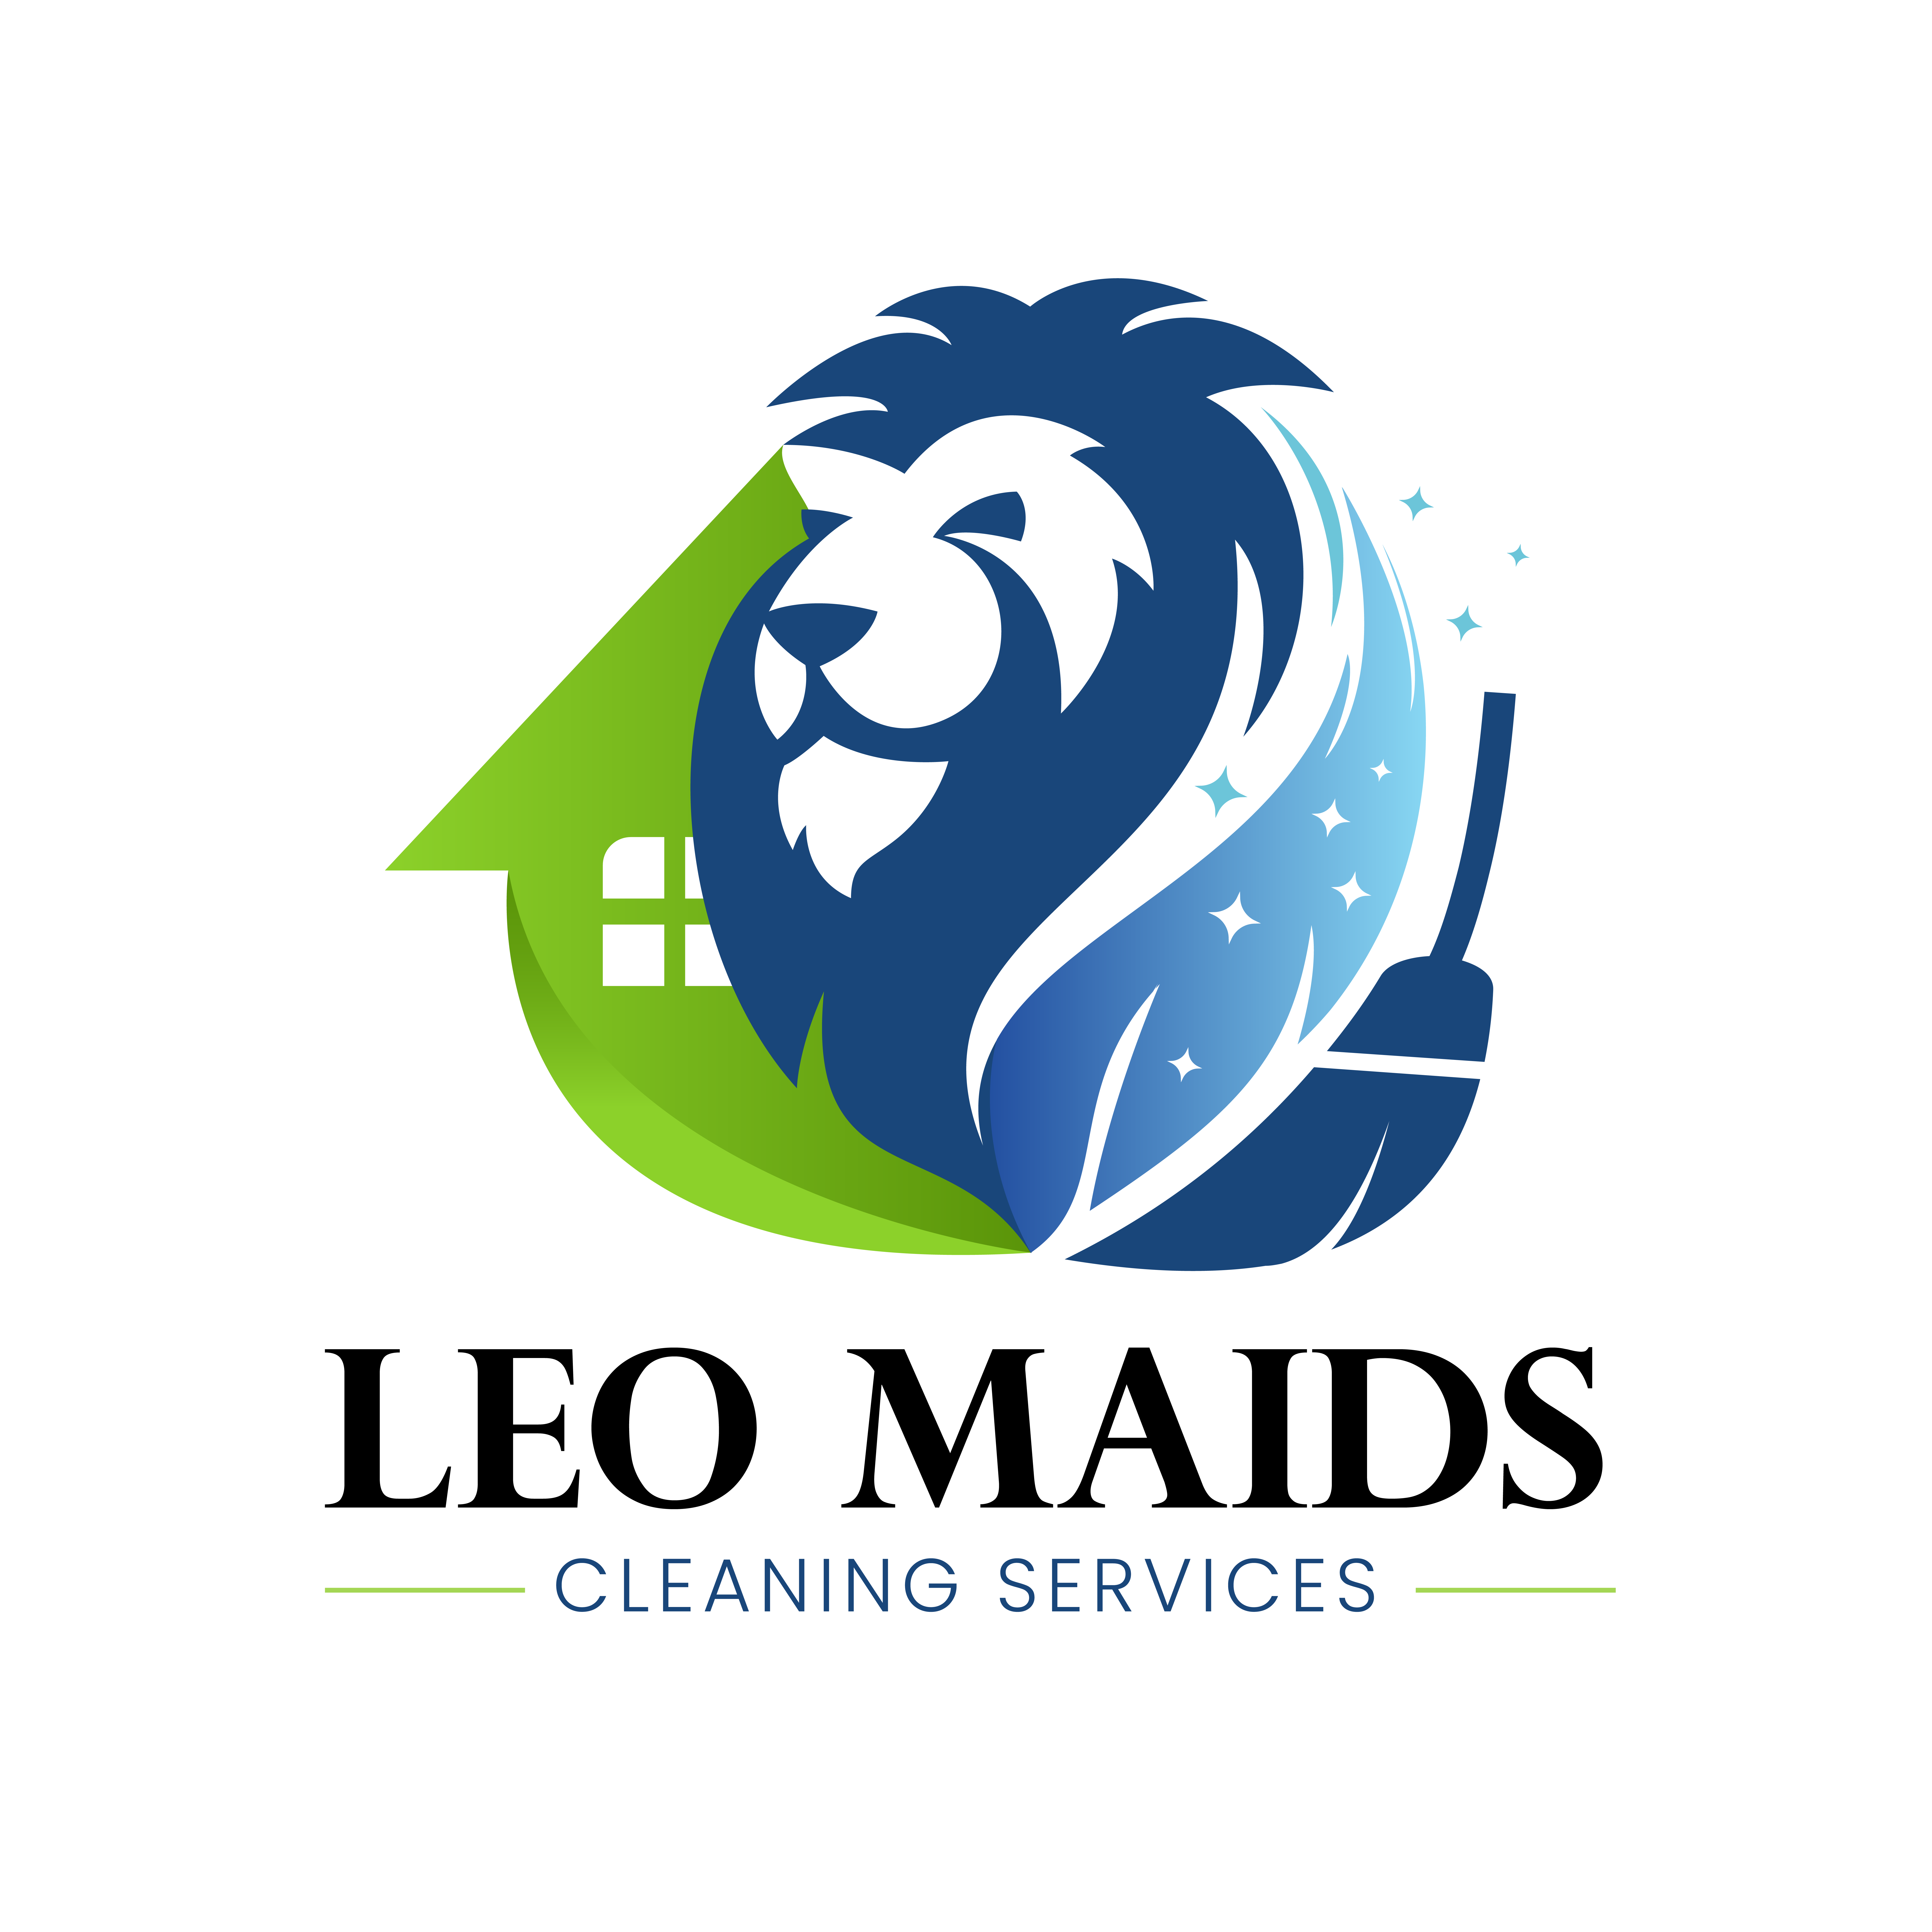 Leomaids house cleaning services's Logo